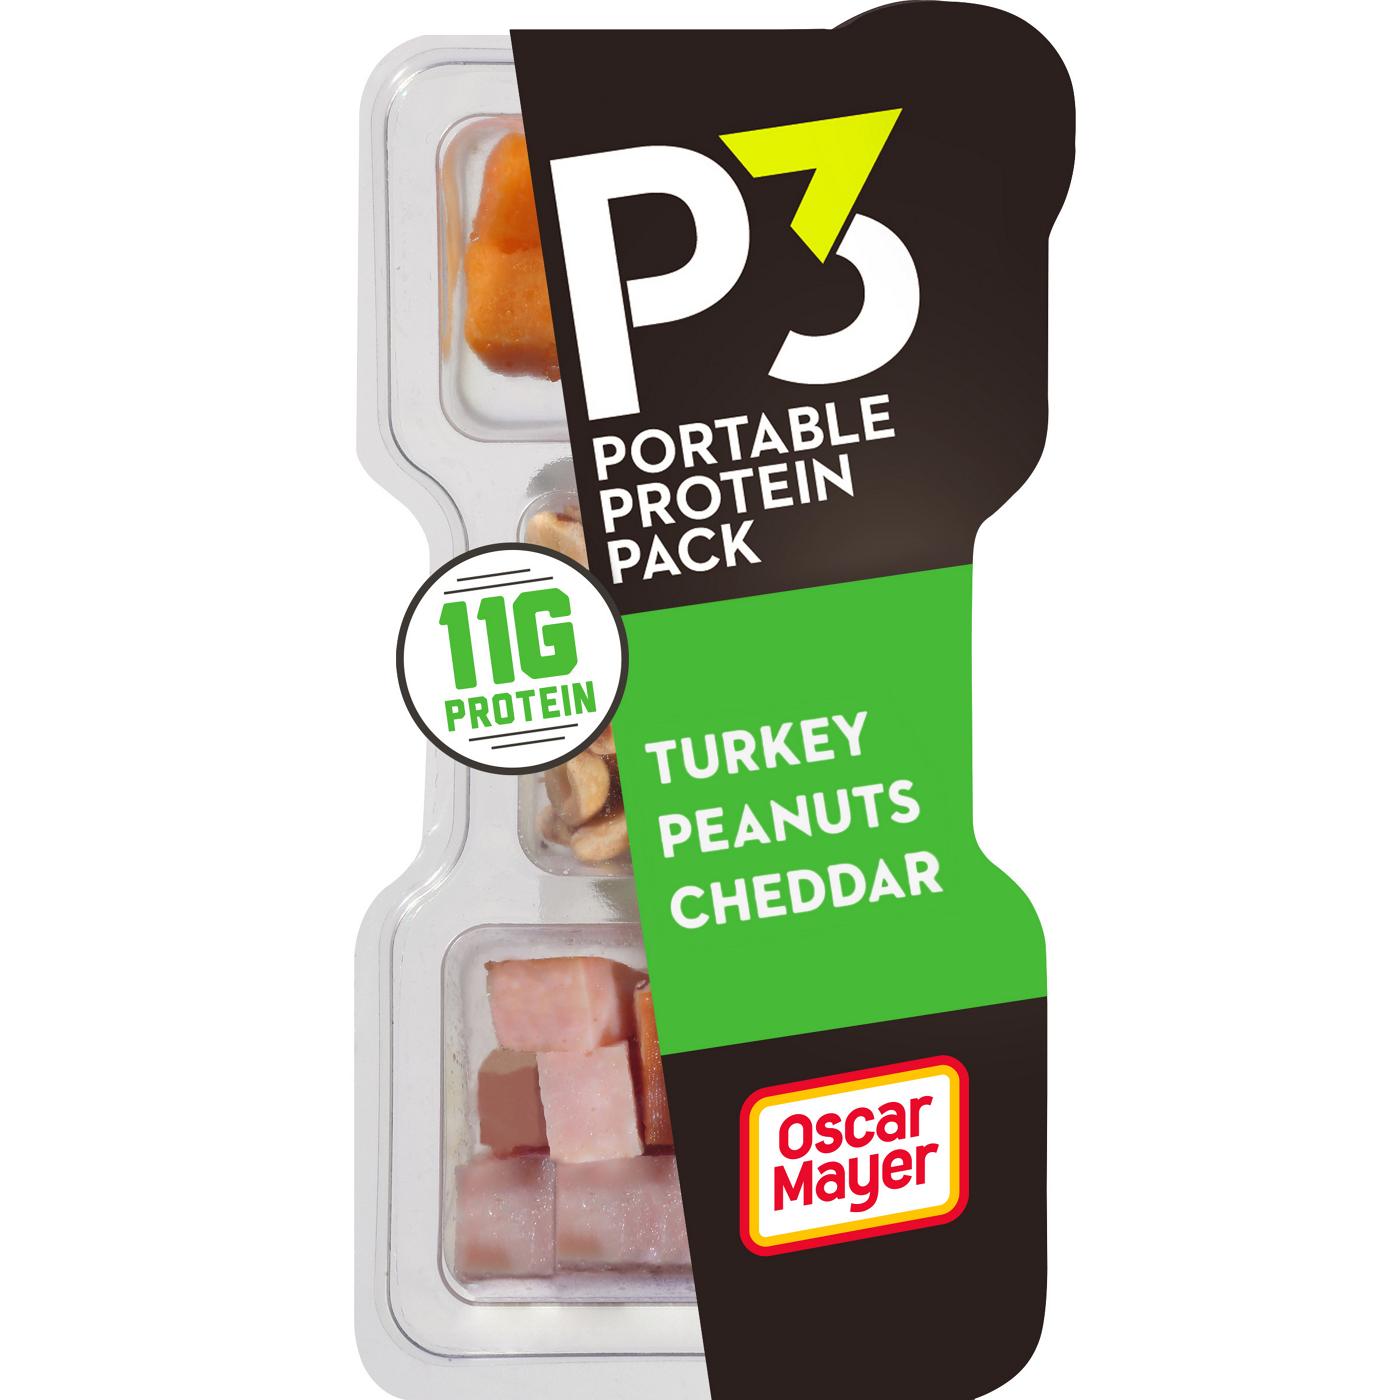 P3 Portable Protein Pack Snack Tray - Turkey, Peanuts & Cheddar; image 1 of 4